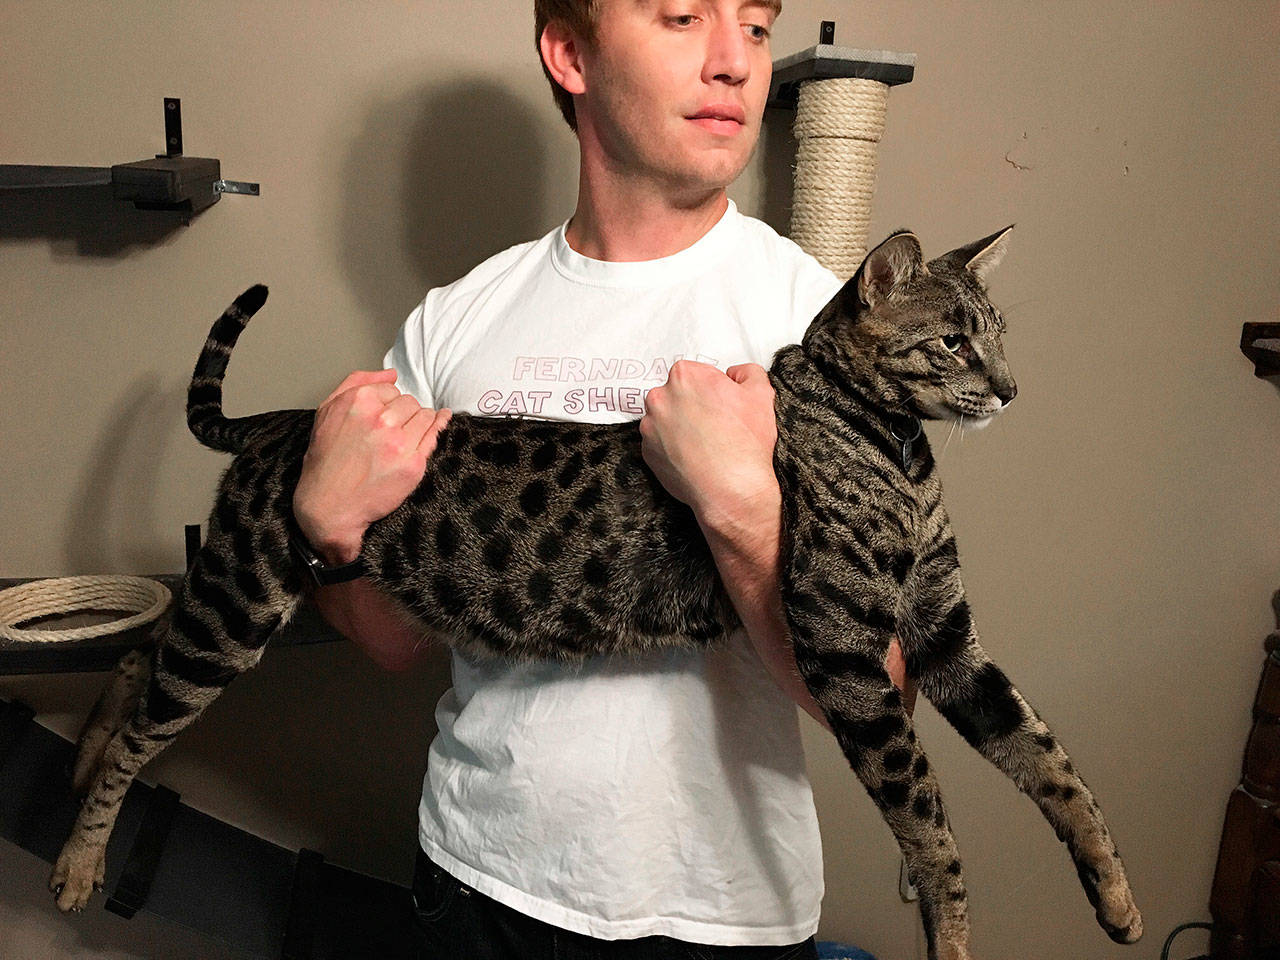 Will Powers holds his cat, Arcturus Aldebaran Powers, on Wednesday in Farmington Hills, Michigan. Arcturus, a F2B Savannah cat, has been named the tallest pet cat in the world in the Guinness World Records 2018 version. Arcturus, at 2 years old, is about 19 inches and still growing. (Edward Pevos / Ann Arbor News)